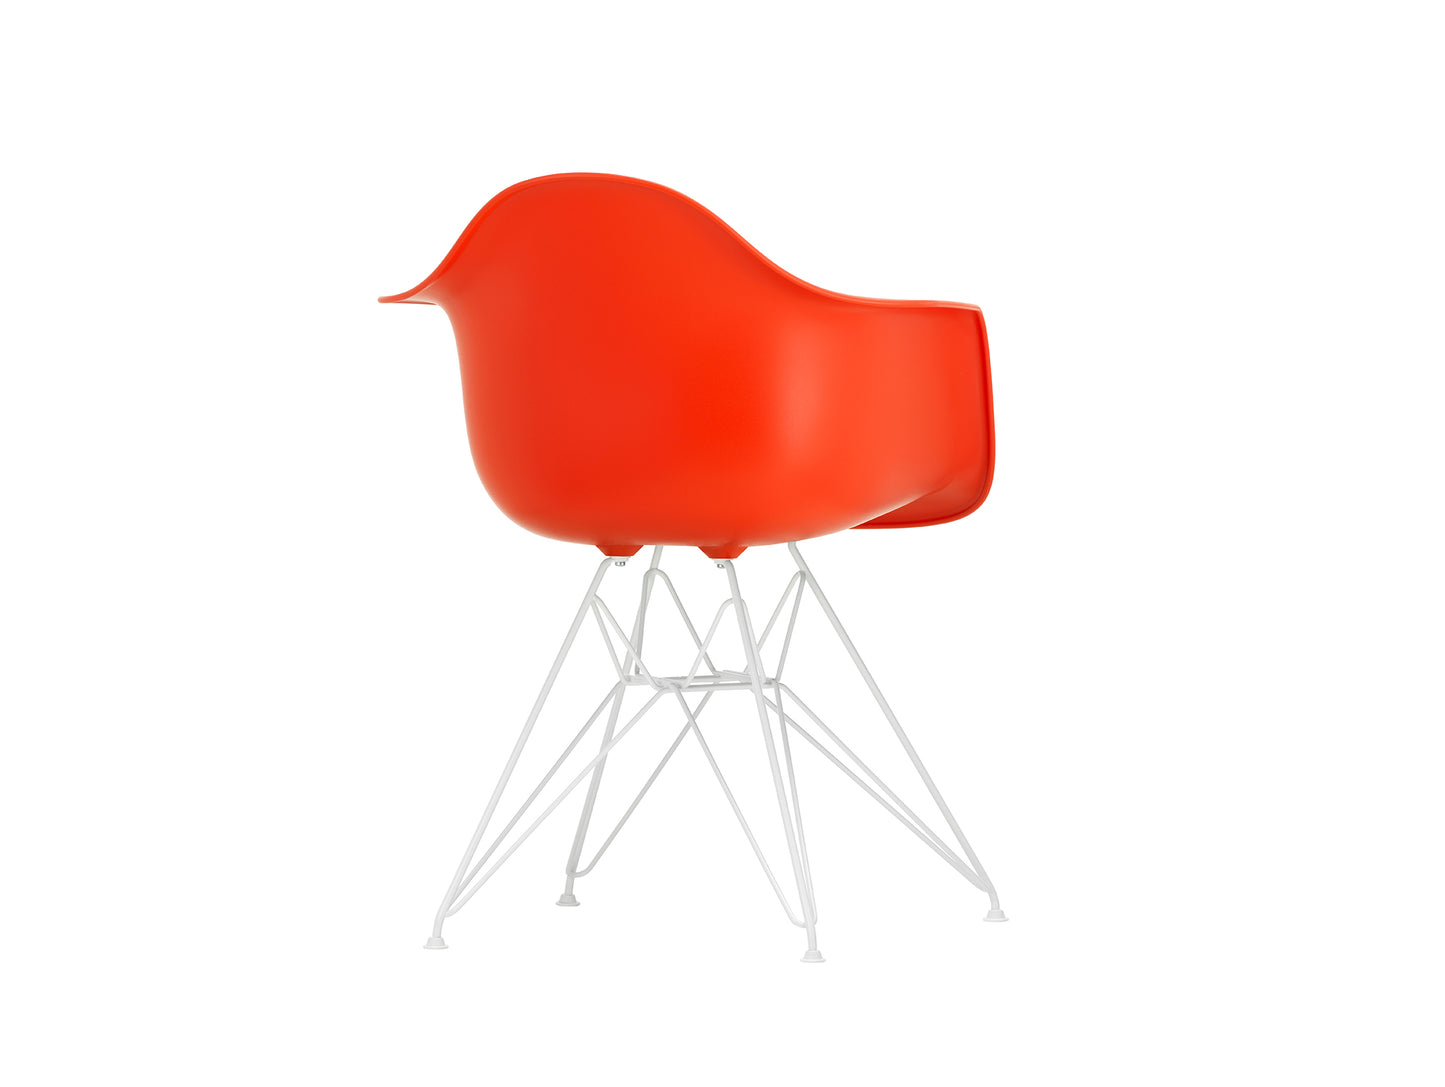 Eames DAR Plastic Armchair RE by Vitra - 03 Poppy Red Shell / White Base